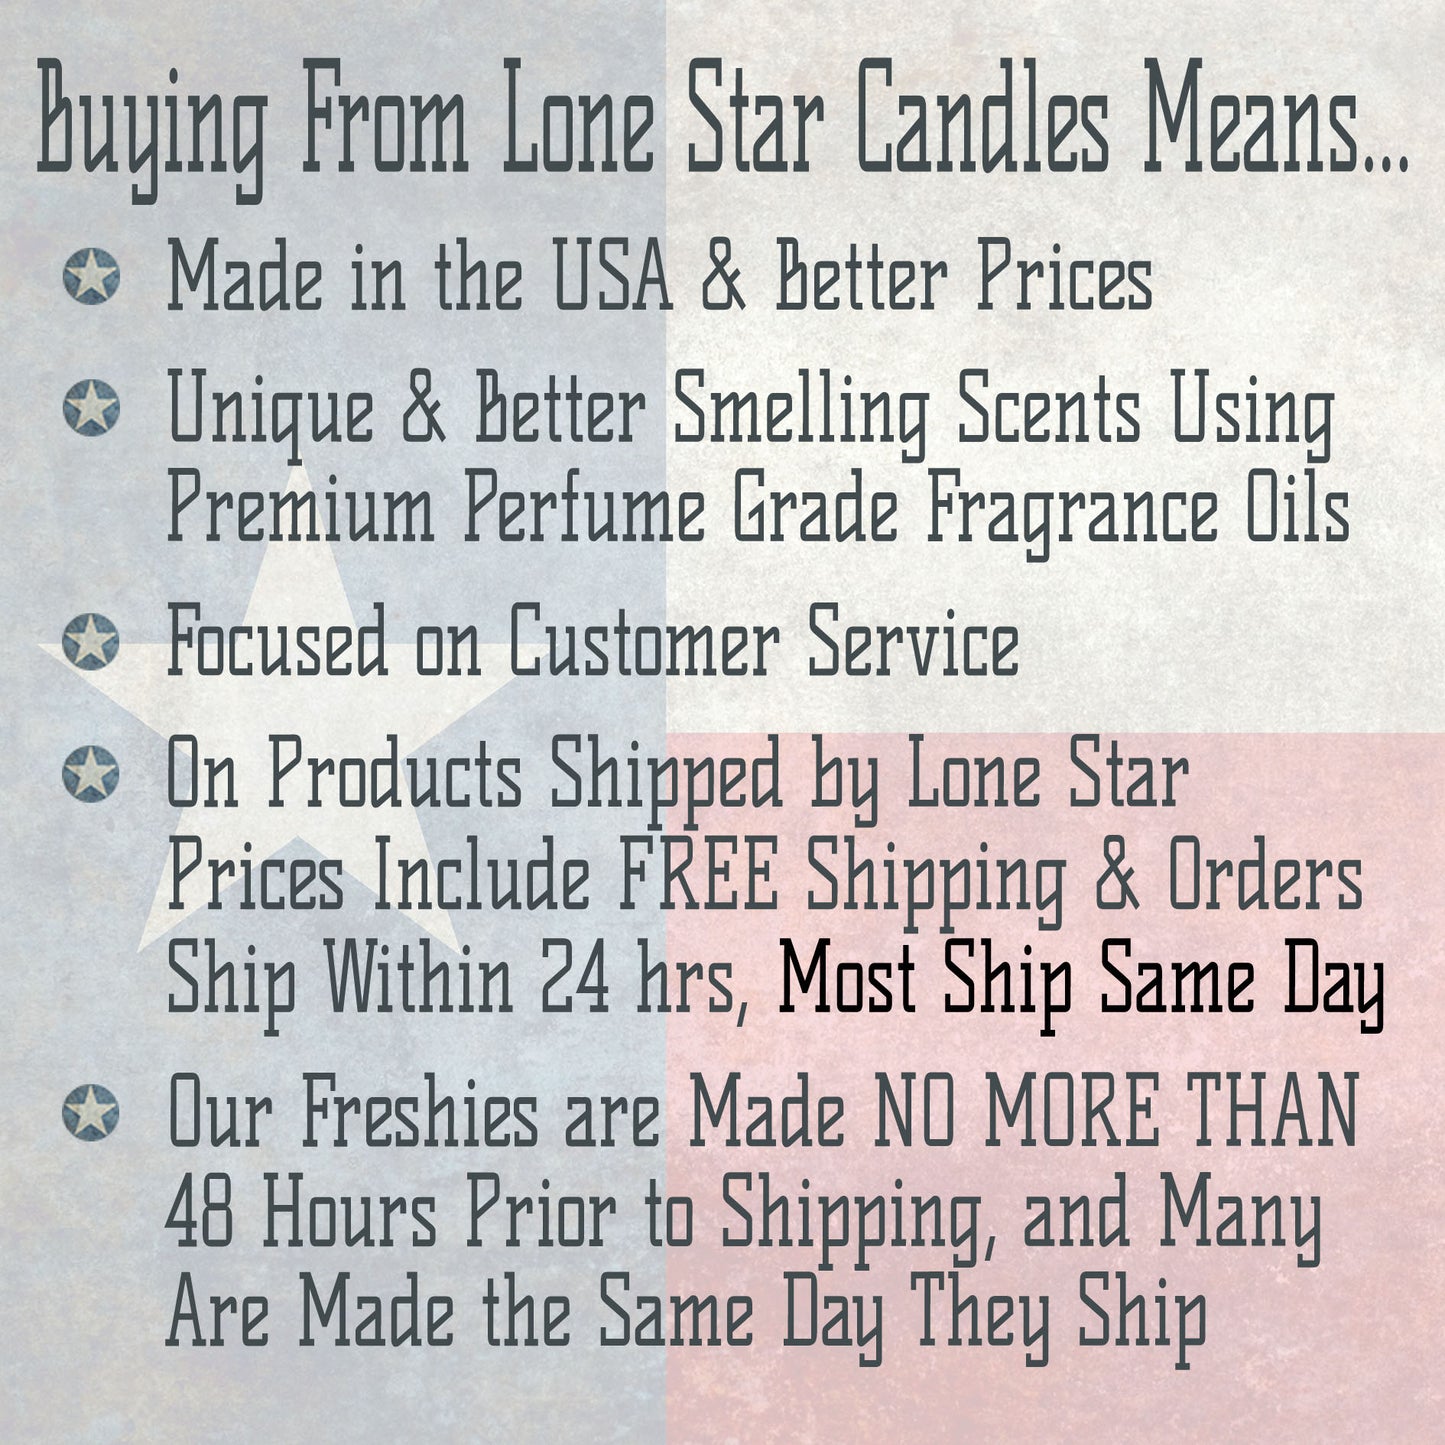 Cranberries & Sandalwood, Lone Star Candles & More's Premium Strongly Scented Freshies, A Delightful Mix of Spiced Cranberry, & Sandalwood, Car & Air Freshener, USA Made in Texas, TX Cowhide 1-Pack